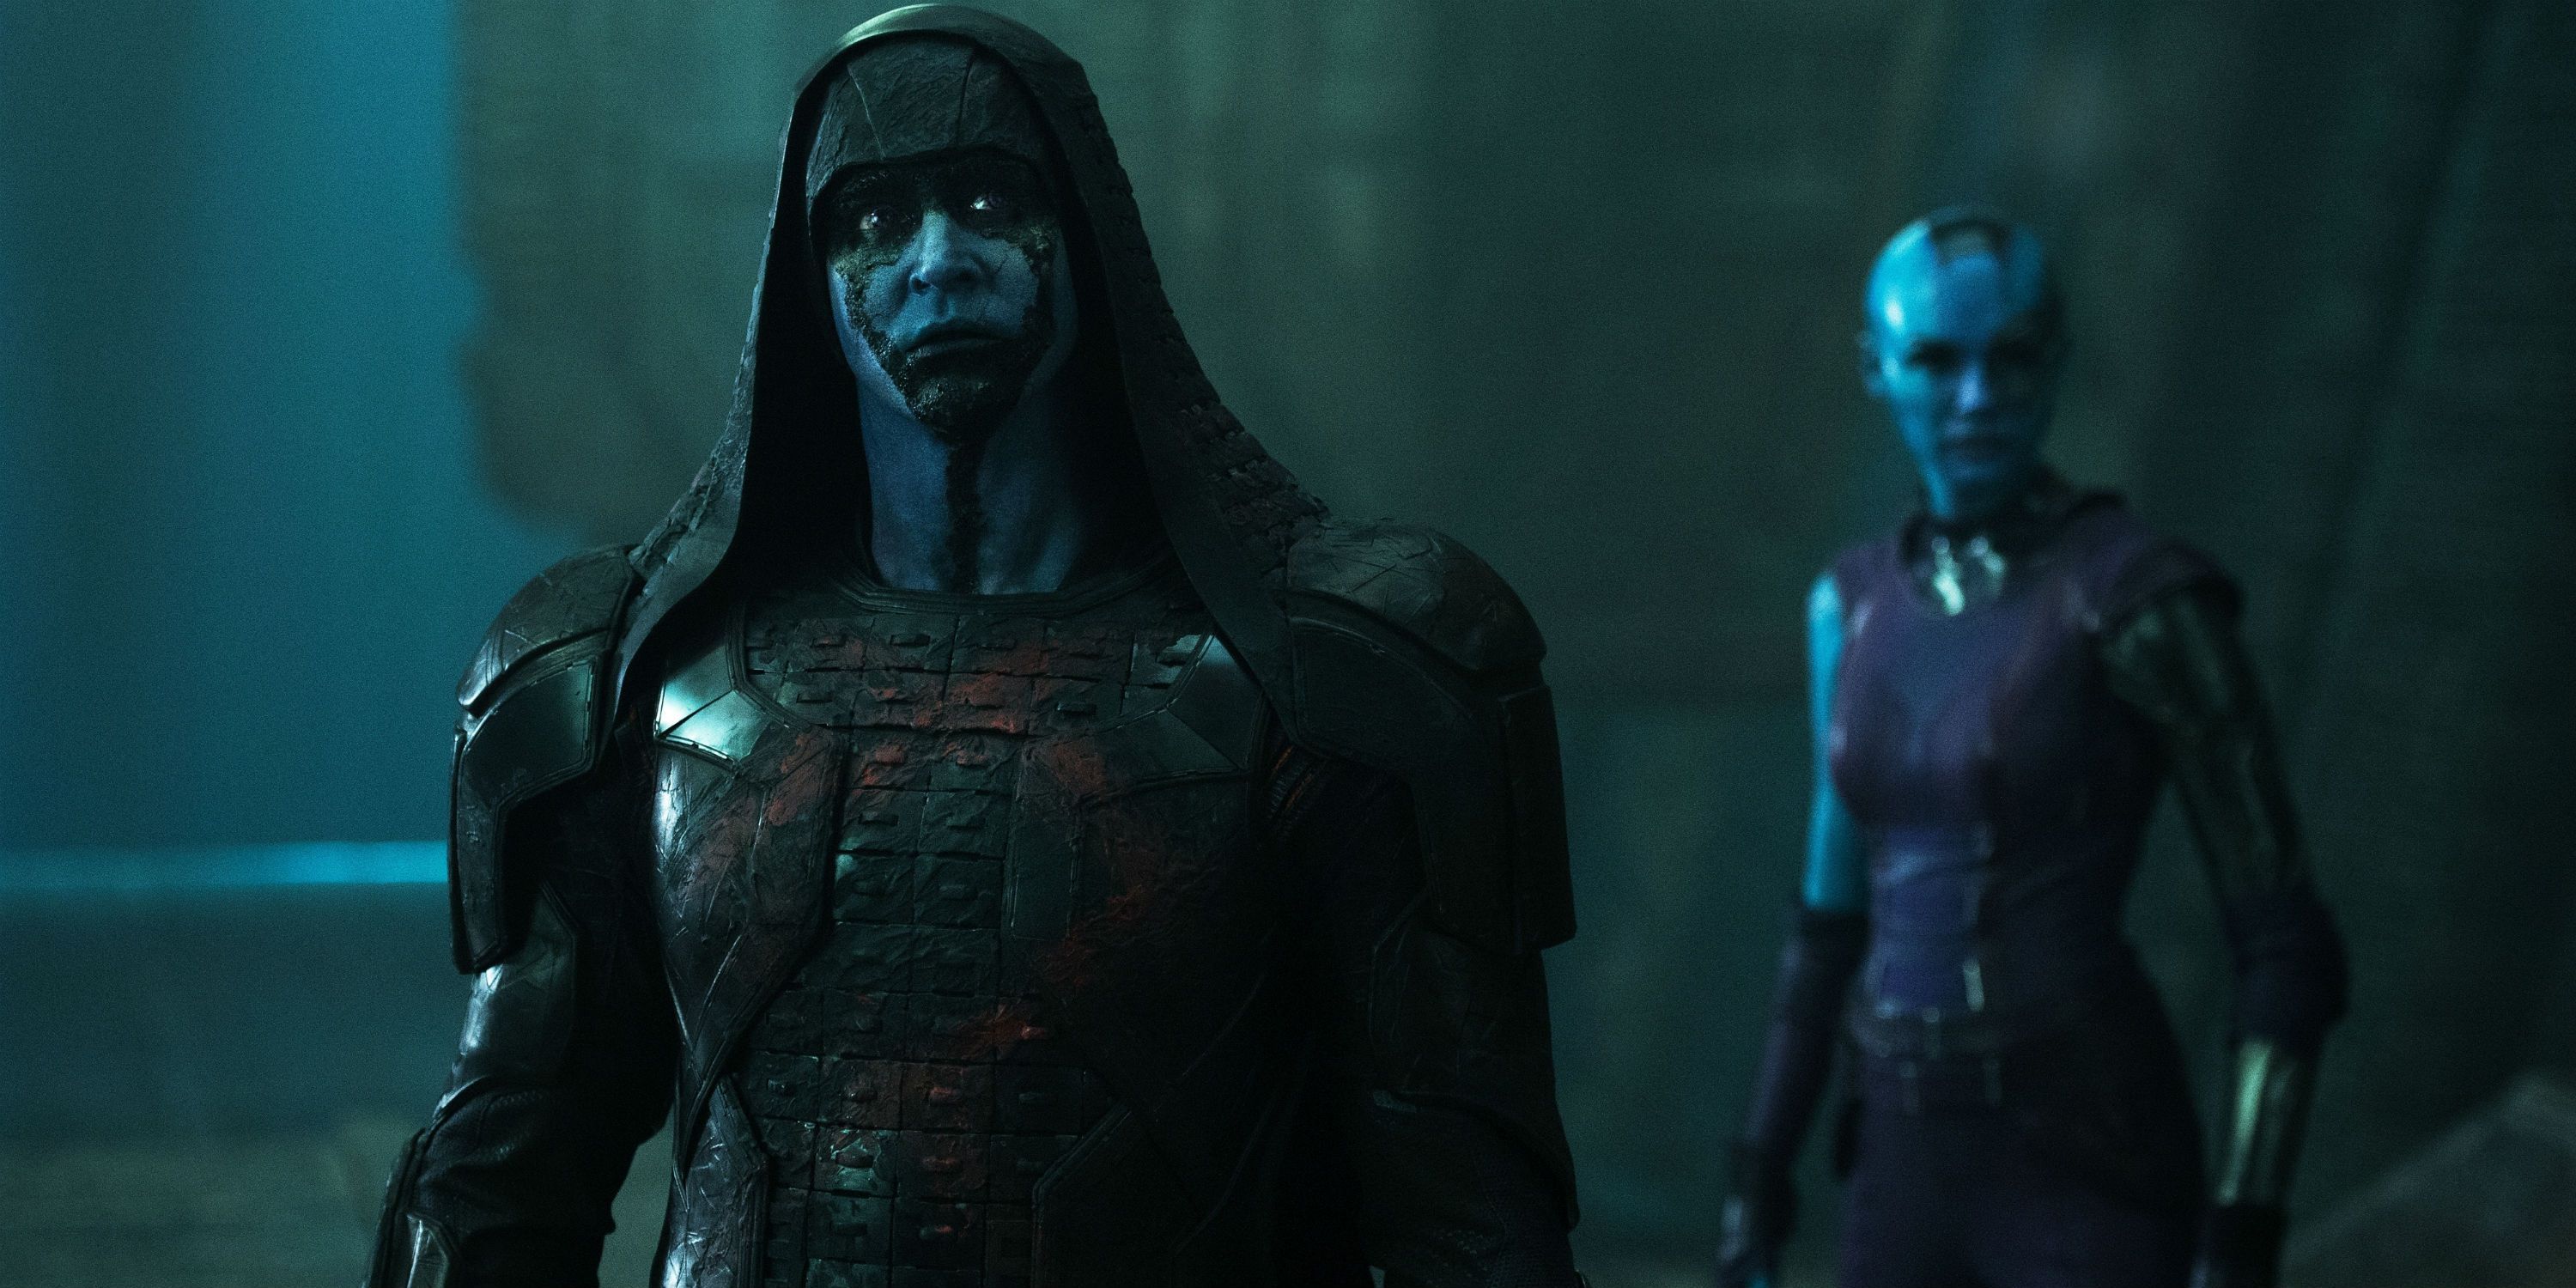 Lee Pace as Ronan the Accuser in Guardians of the Galaxy